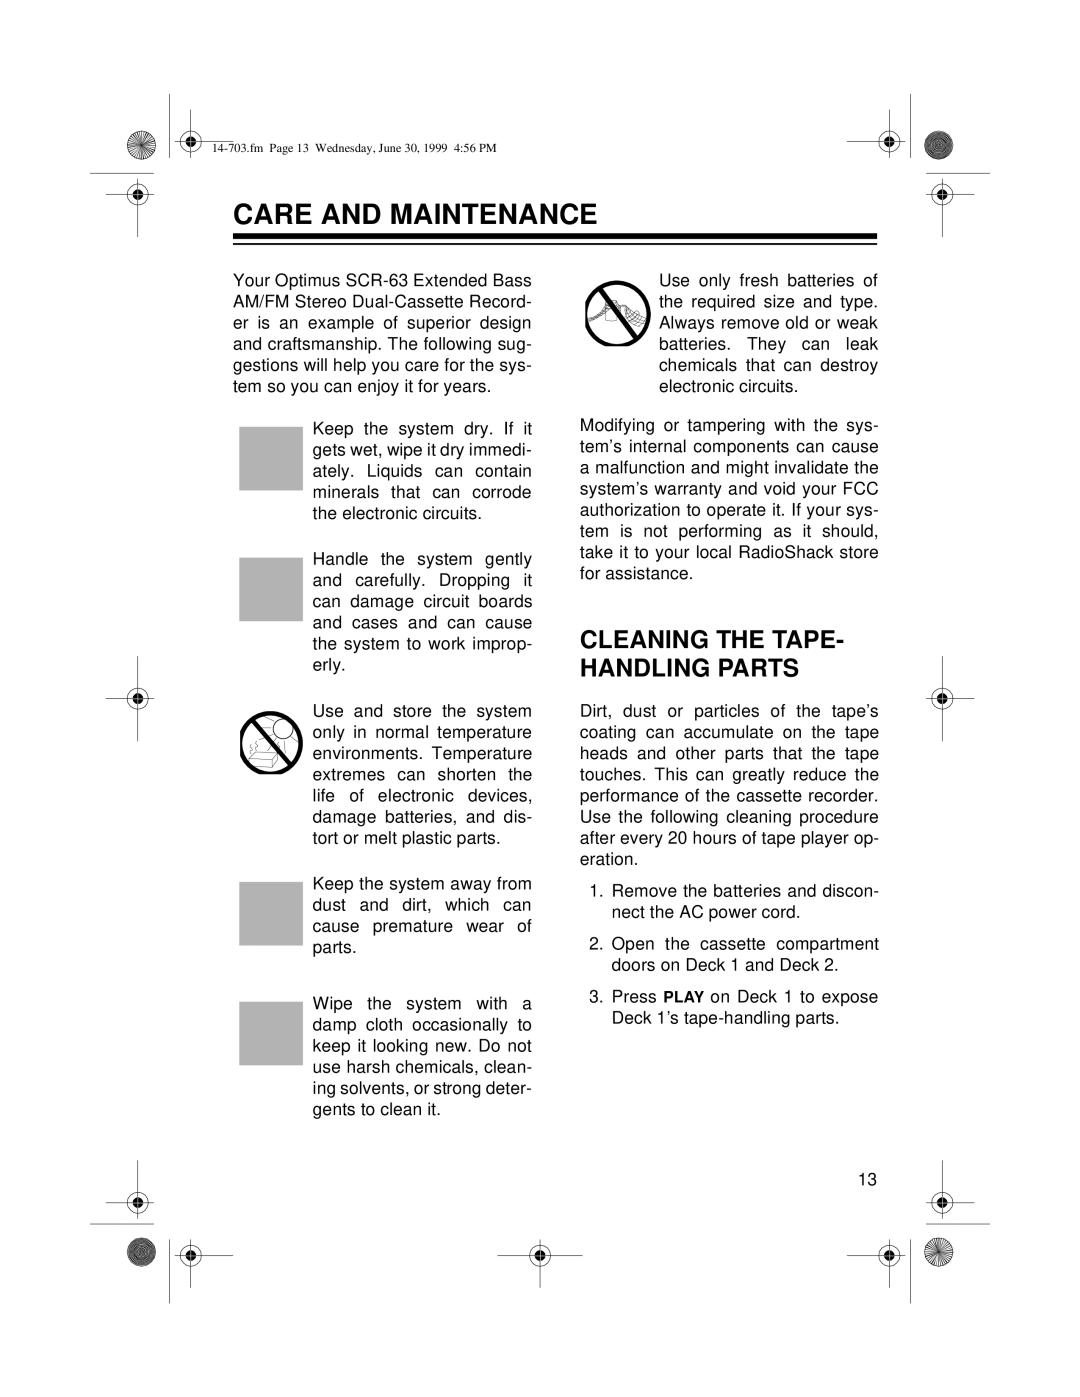 Optimus SCR-63 owner manual Care And Maintenance, Cleaning The Tape- Handling Parts 